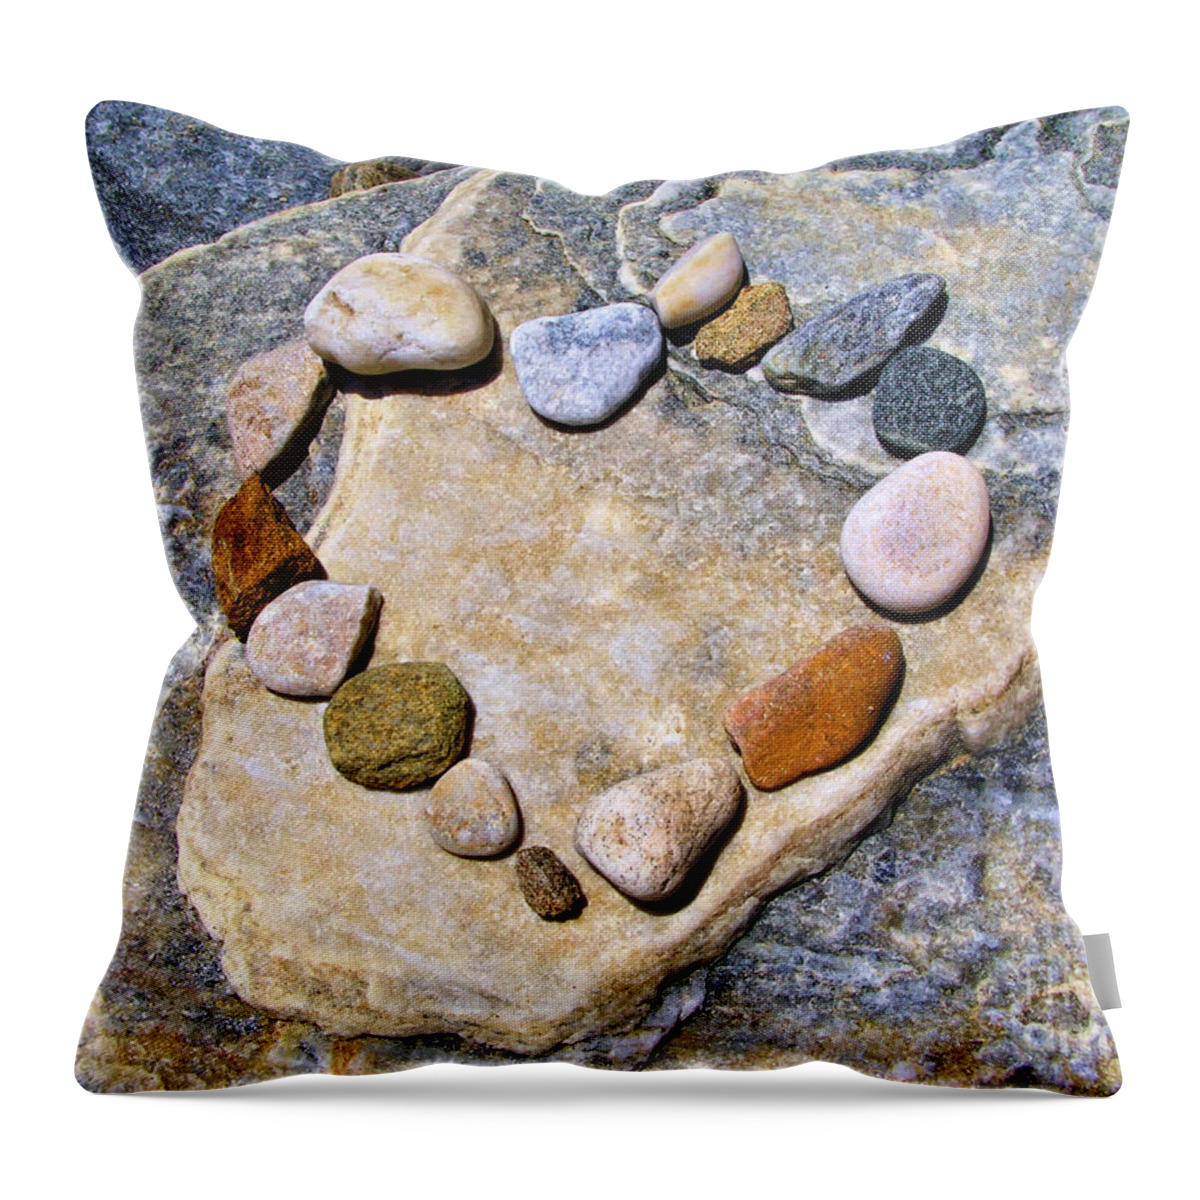 Valentines Throw Pillow featuring the photograph Heart and stones by Daliana Pacuraru